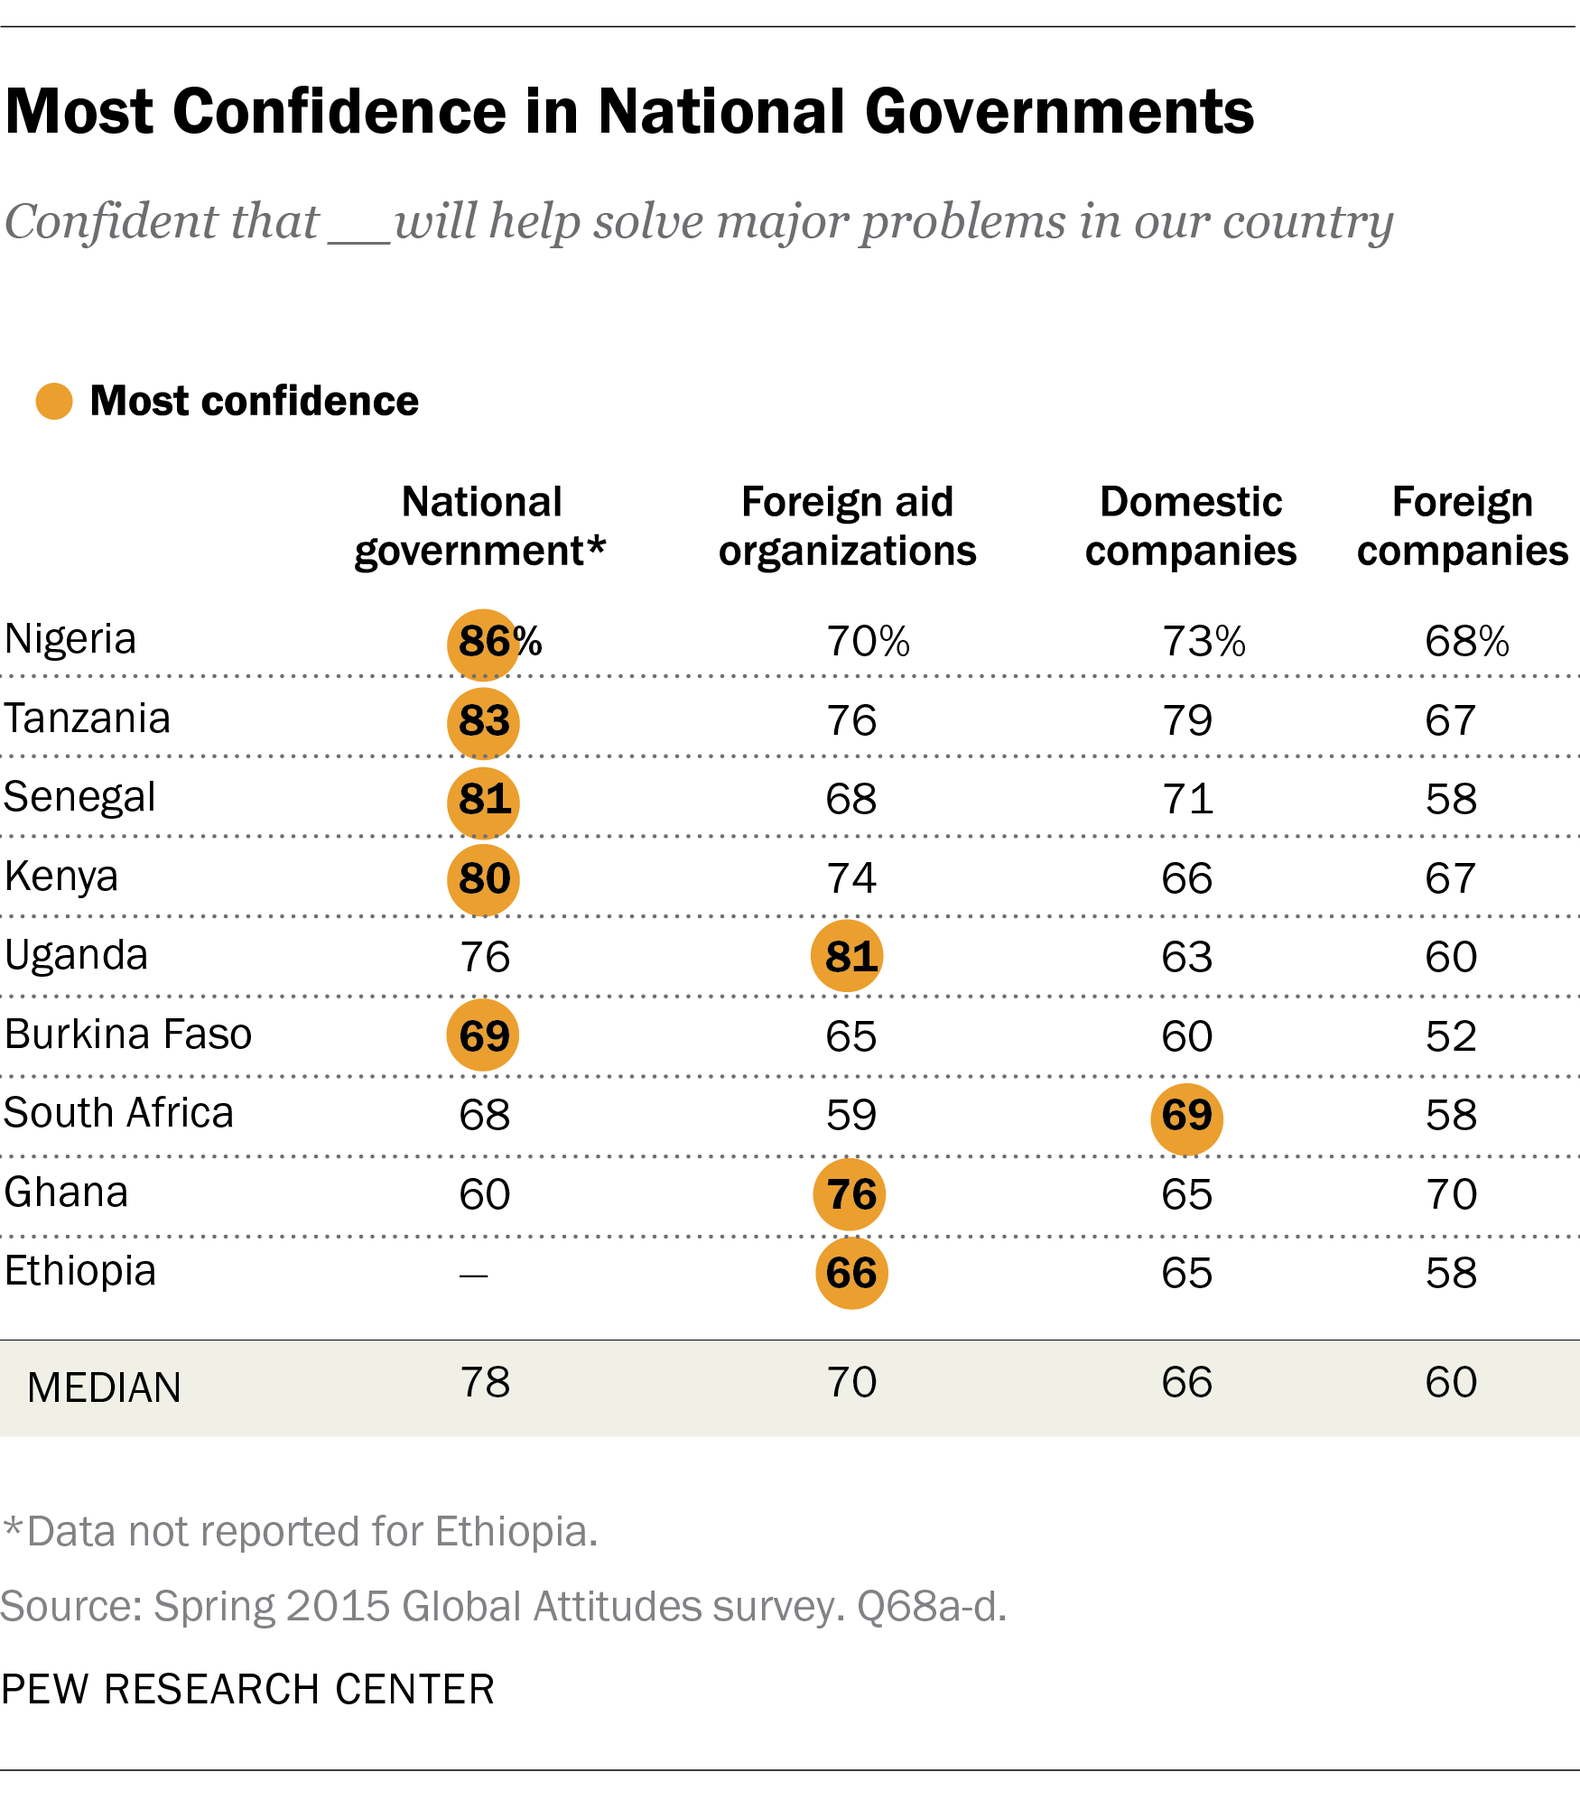 Most Confidence in National Governments